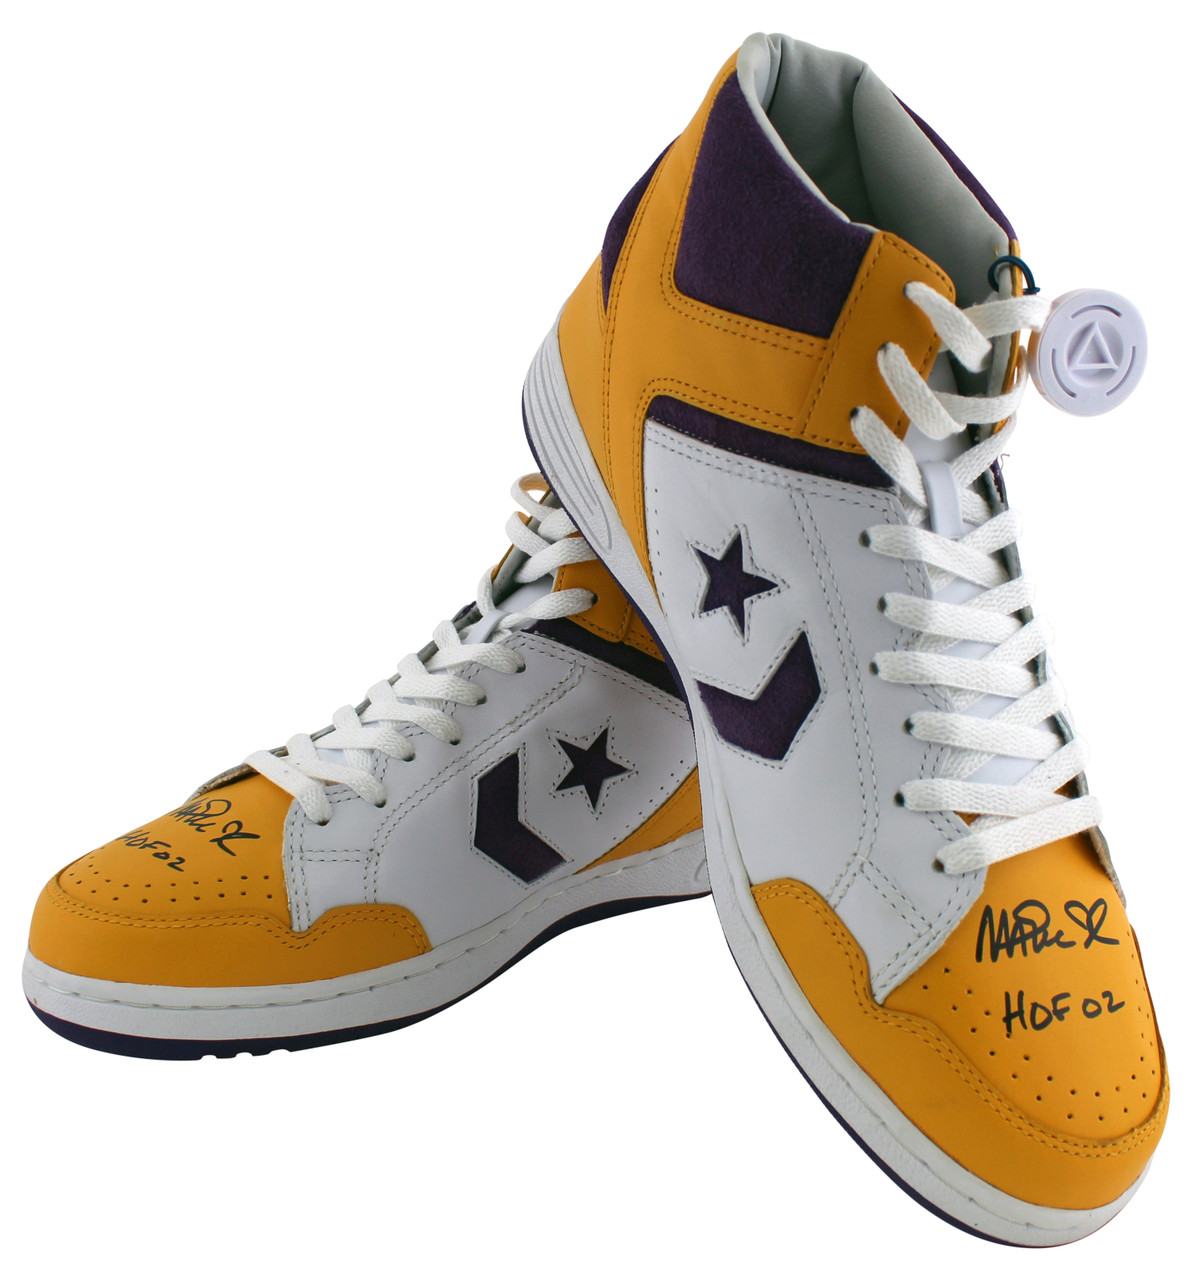 Lakers Magic Johnson HOF 02 Authentic Signed Converse Weapon Shoes BAS Witness